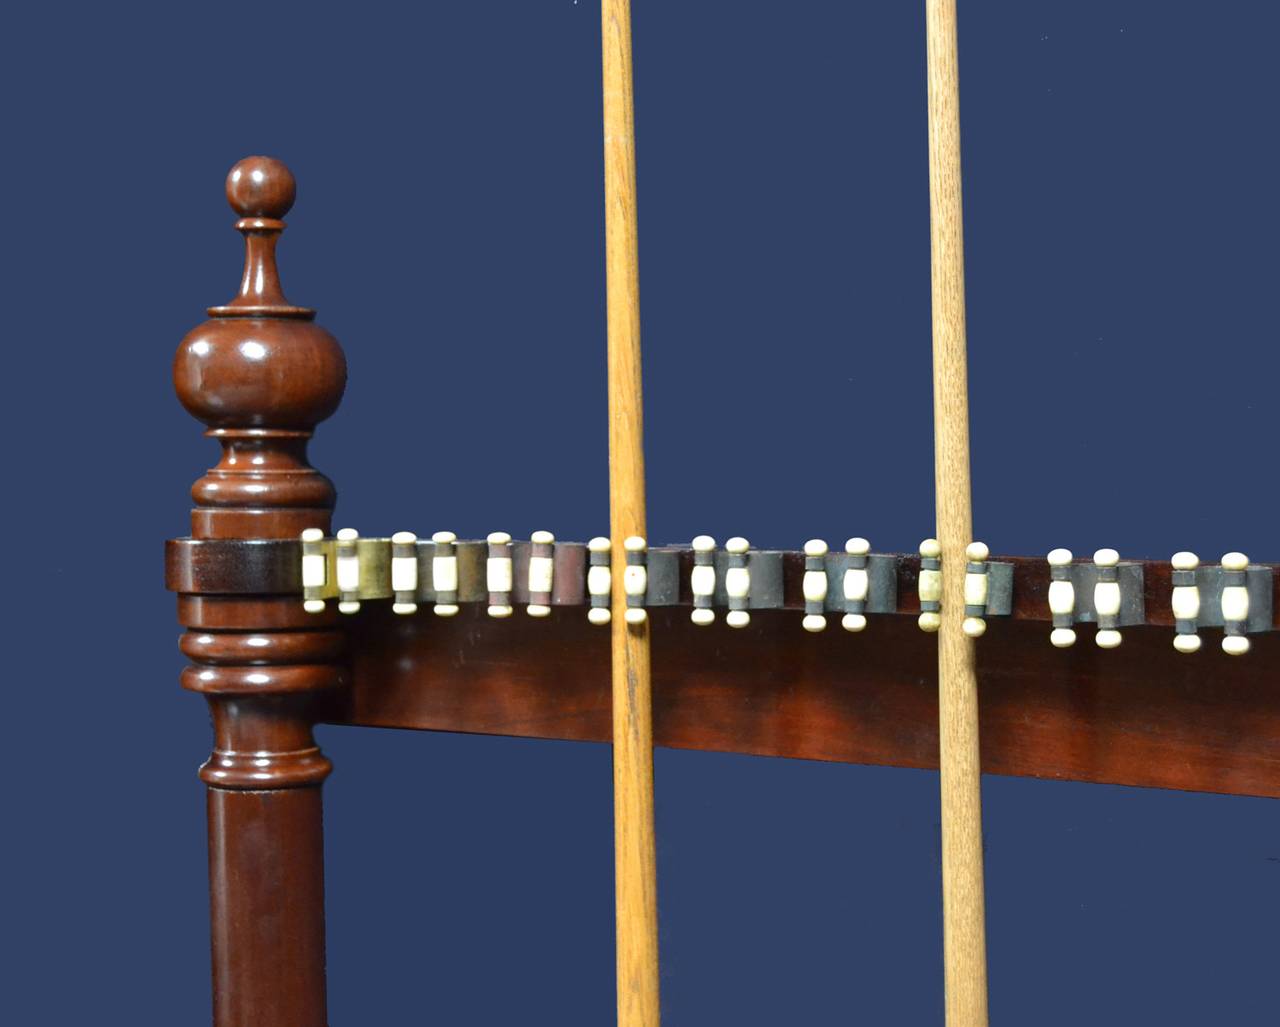 A mahogany framed Billiard - Snooker cue rack with upright columns topped with decorative finials, fitted with original bone clips and able to hold 18 cues.